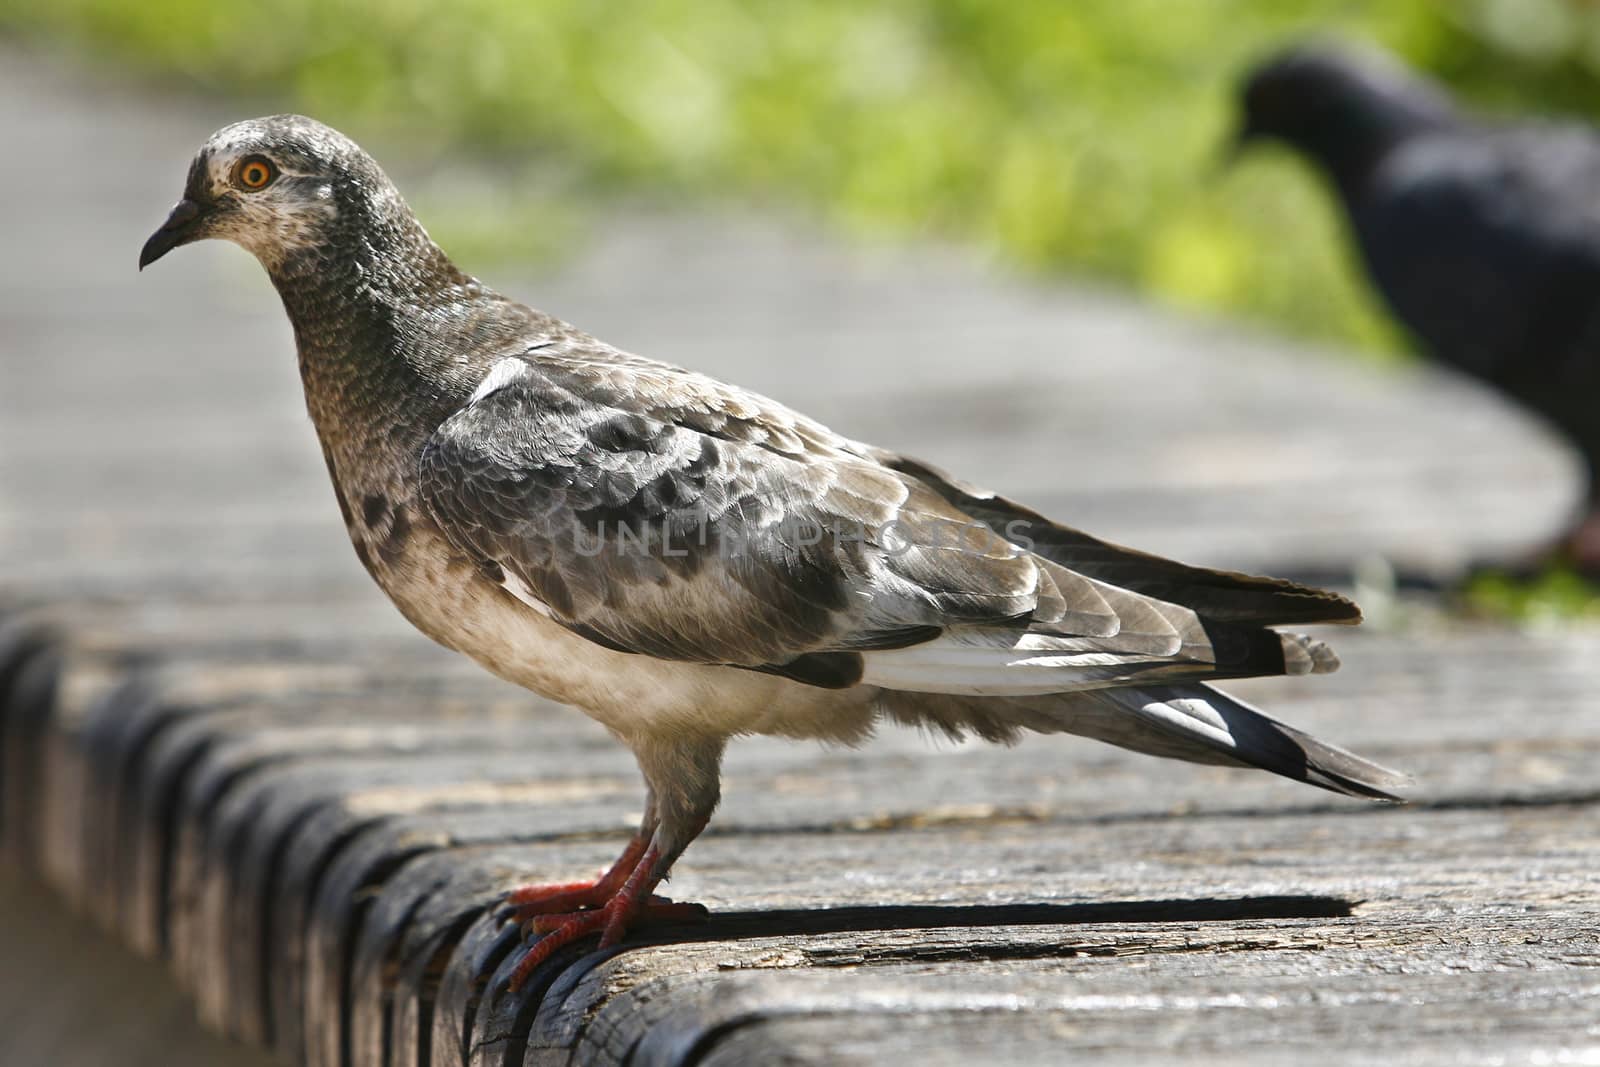 Pigeon posing on a bench